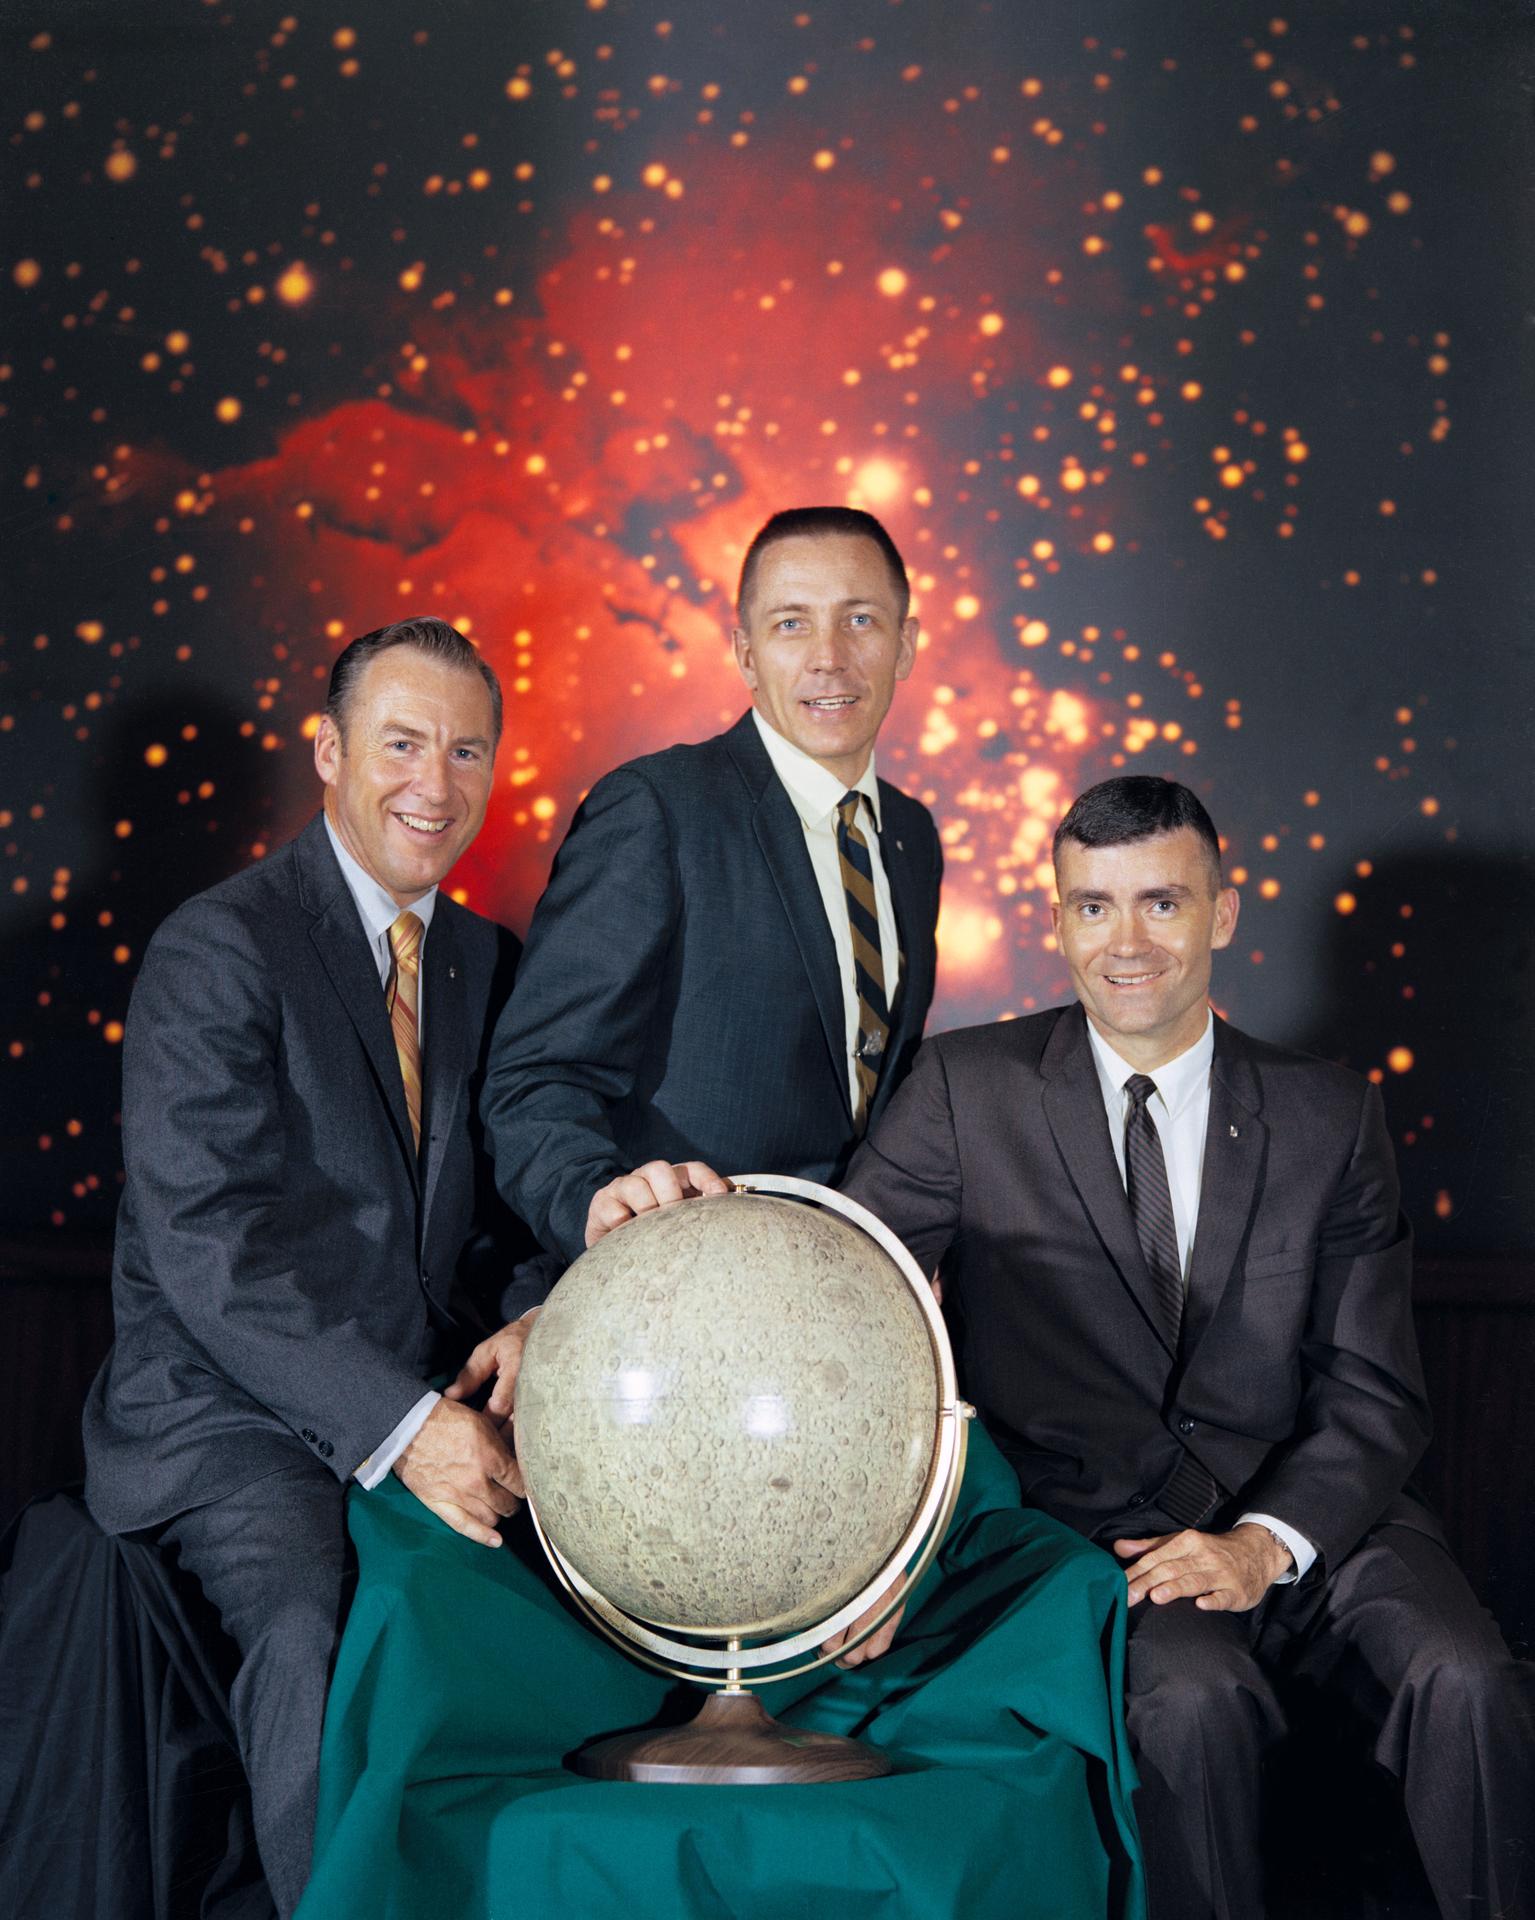 Apollo 13 lcrew were, from left, James A Lovell Jr., John L. Swigert Jr., and Fred W. Haise Jr. 